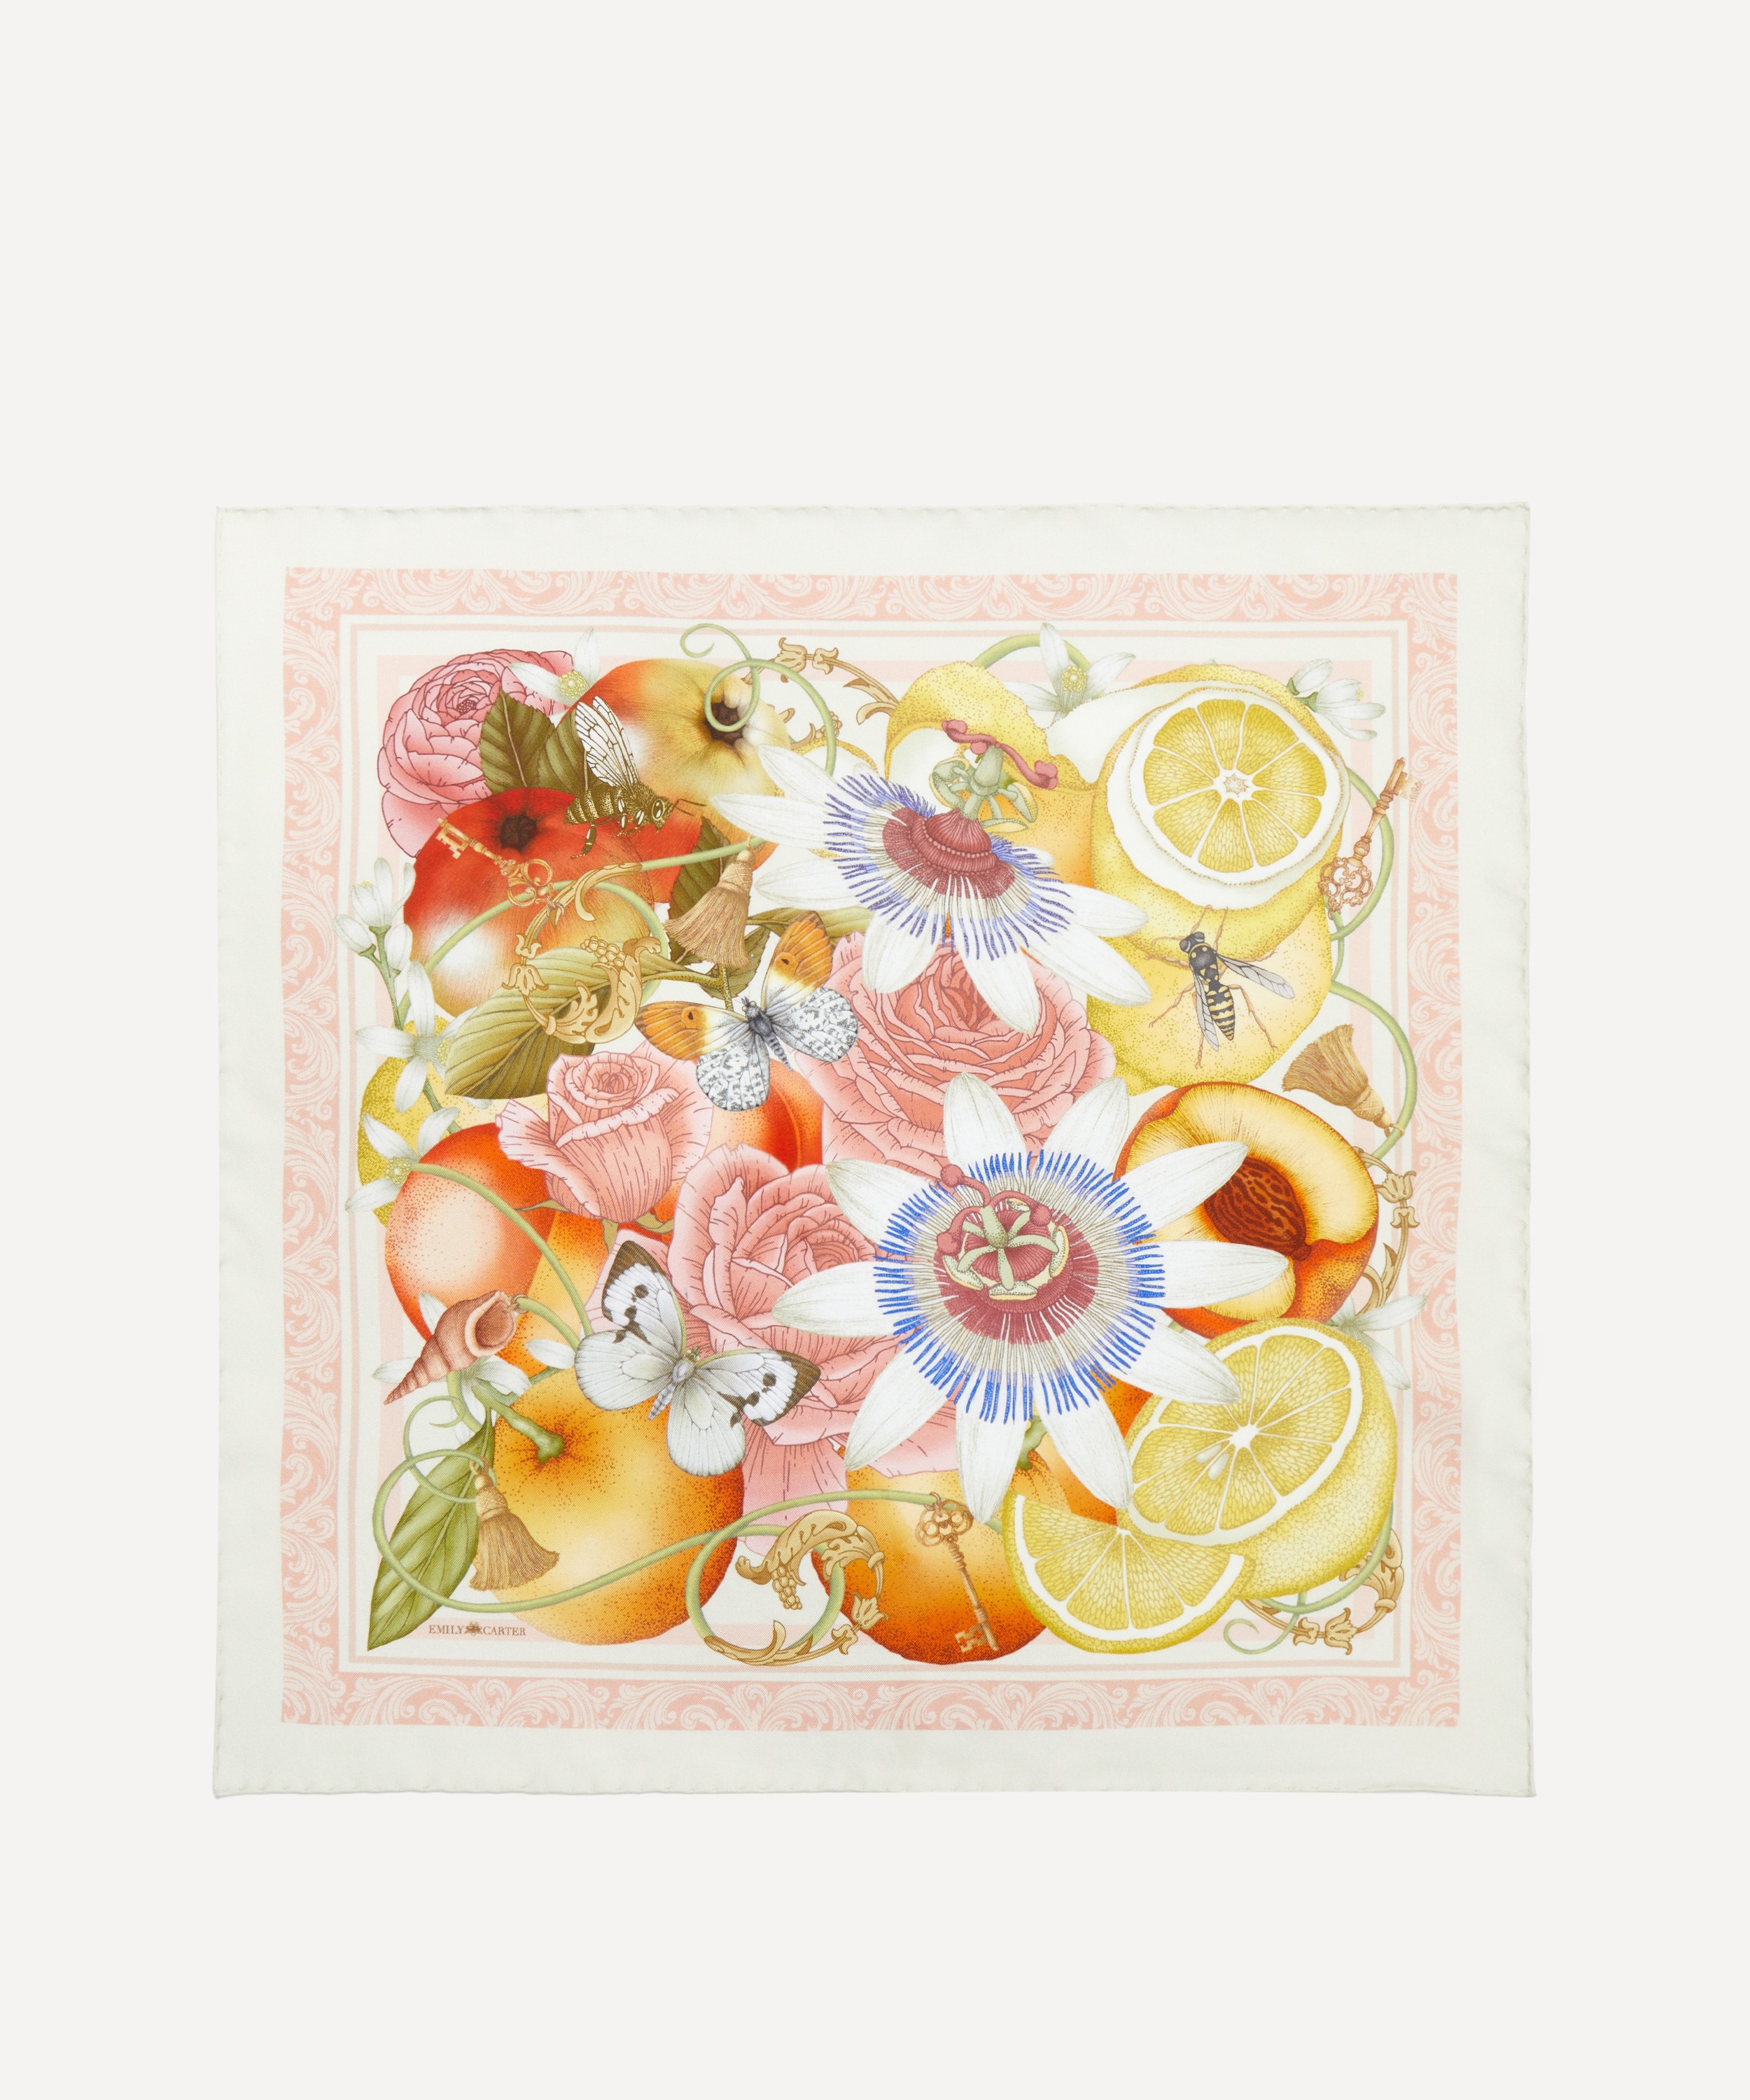 Emily Carter - The Rose and Lemon 45x45 Silk Scarf image number 0